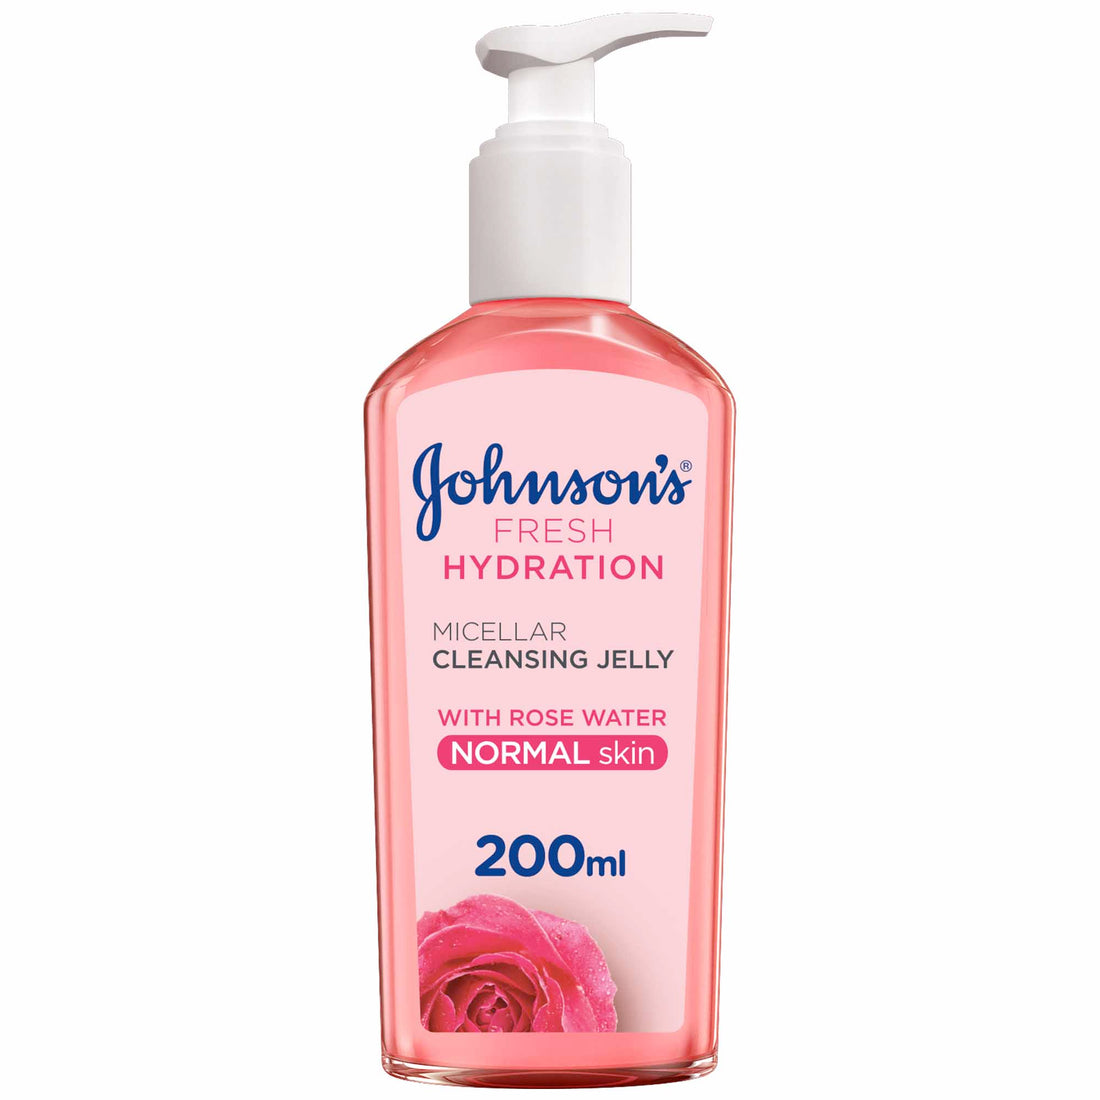 JOHNSON’S Face Cleanser, Fresh Hydration, Micellar Cleansing Jelly, Normal Skin, 200ml